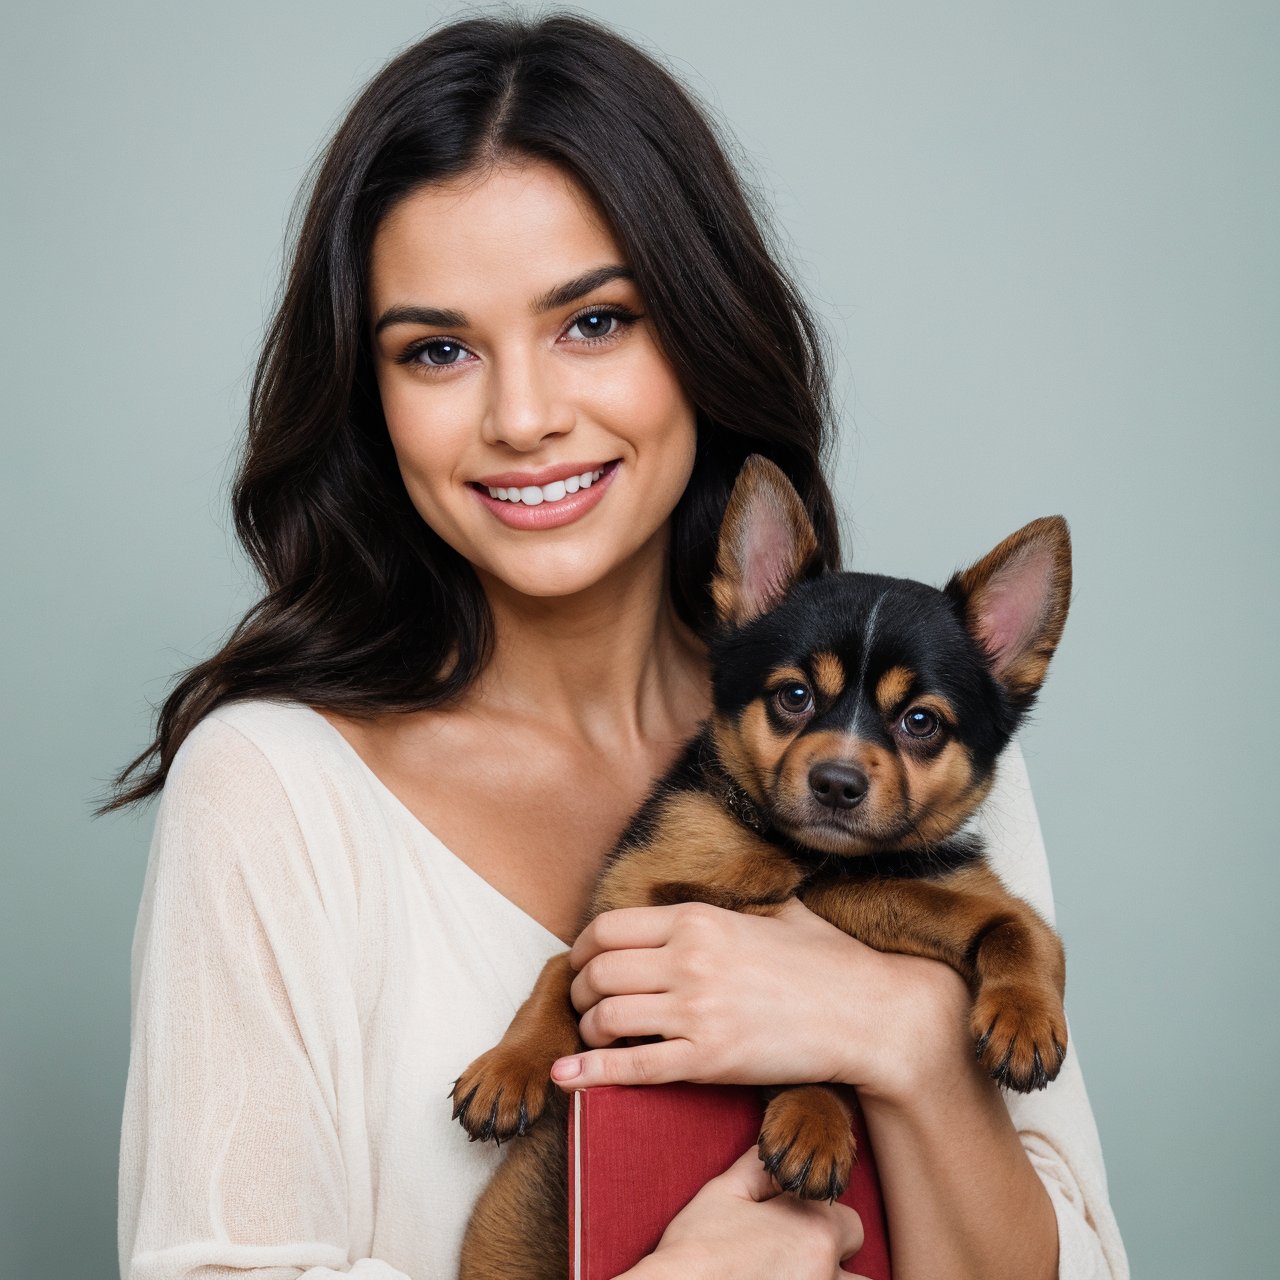 Cute puppy. Beautiful puppy. Adorable puppy. Portrait of a woman in a white dress, holding a book with delicate hands, expressing beauty and strength. Detailed portrait of an indigenous woman in cartoon style, with beautiful eyes, quick brushstrokes and vibrant colors. Cute puppy. Beautiful puppy. Masterpiece of a cute puppy, with red and white fur. Italian girl posing, detailed face, dark hair, athletic body, wearing red flannel and jeans. Soft hair, happy smile, cute Italian.